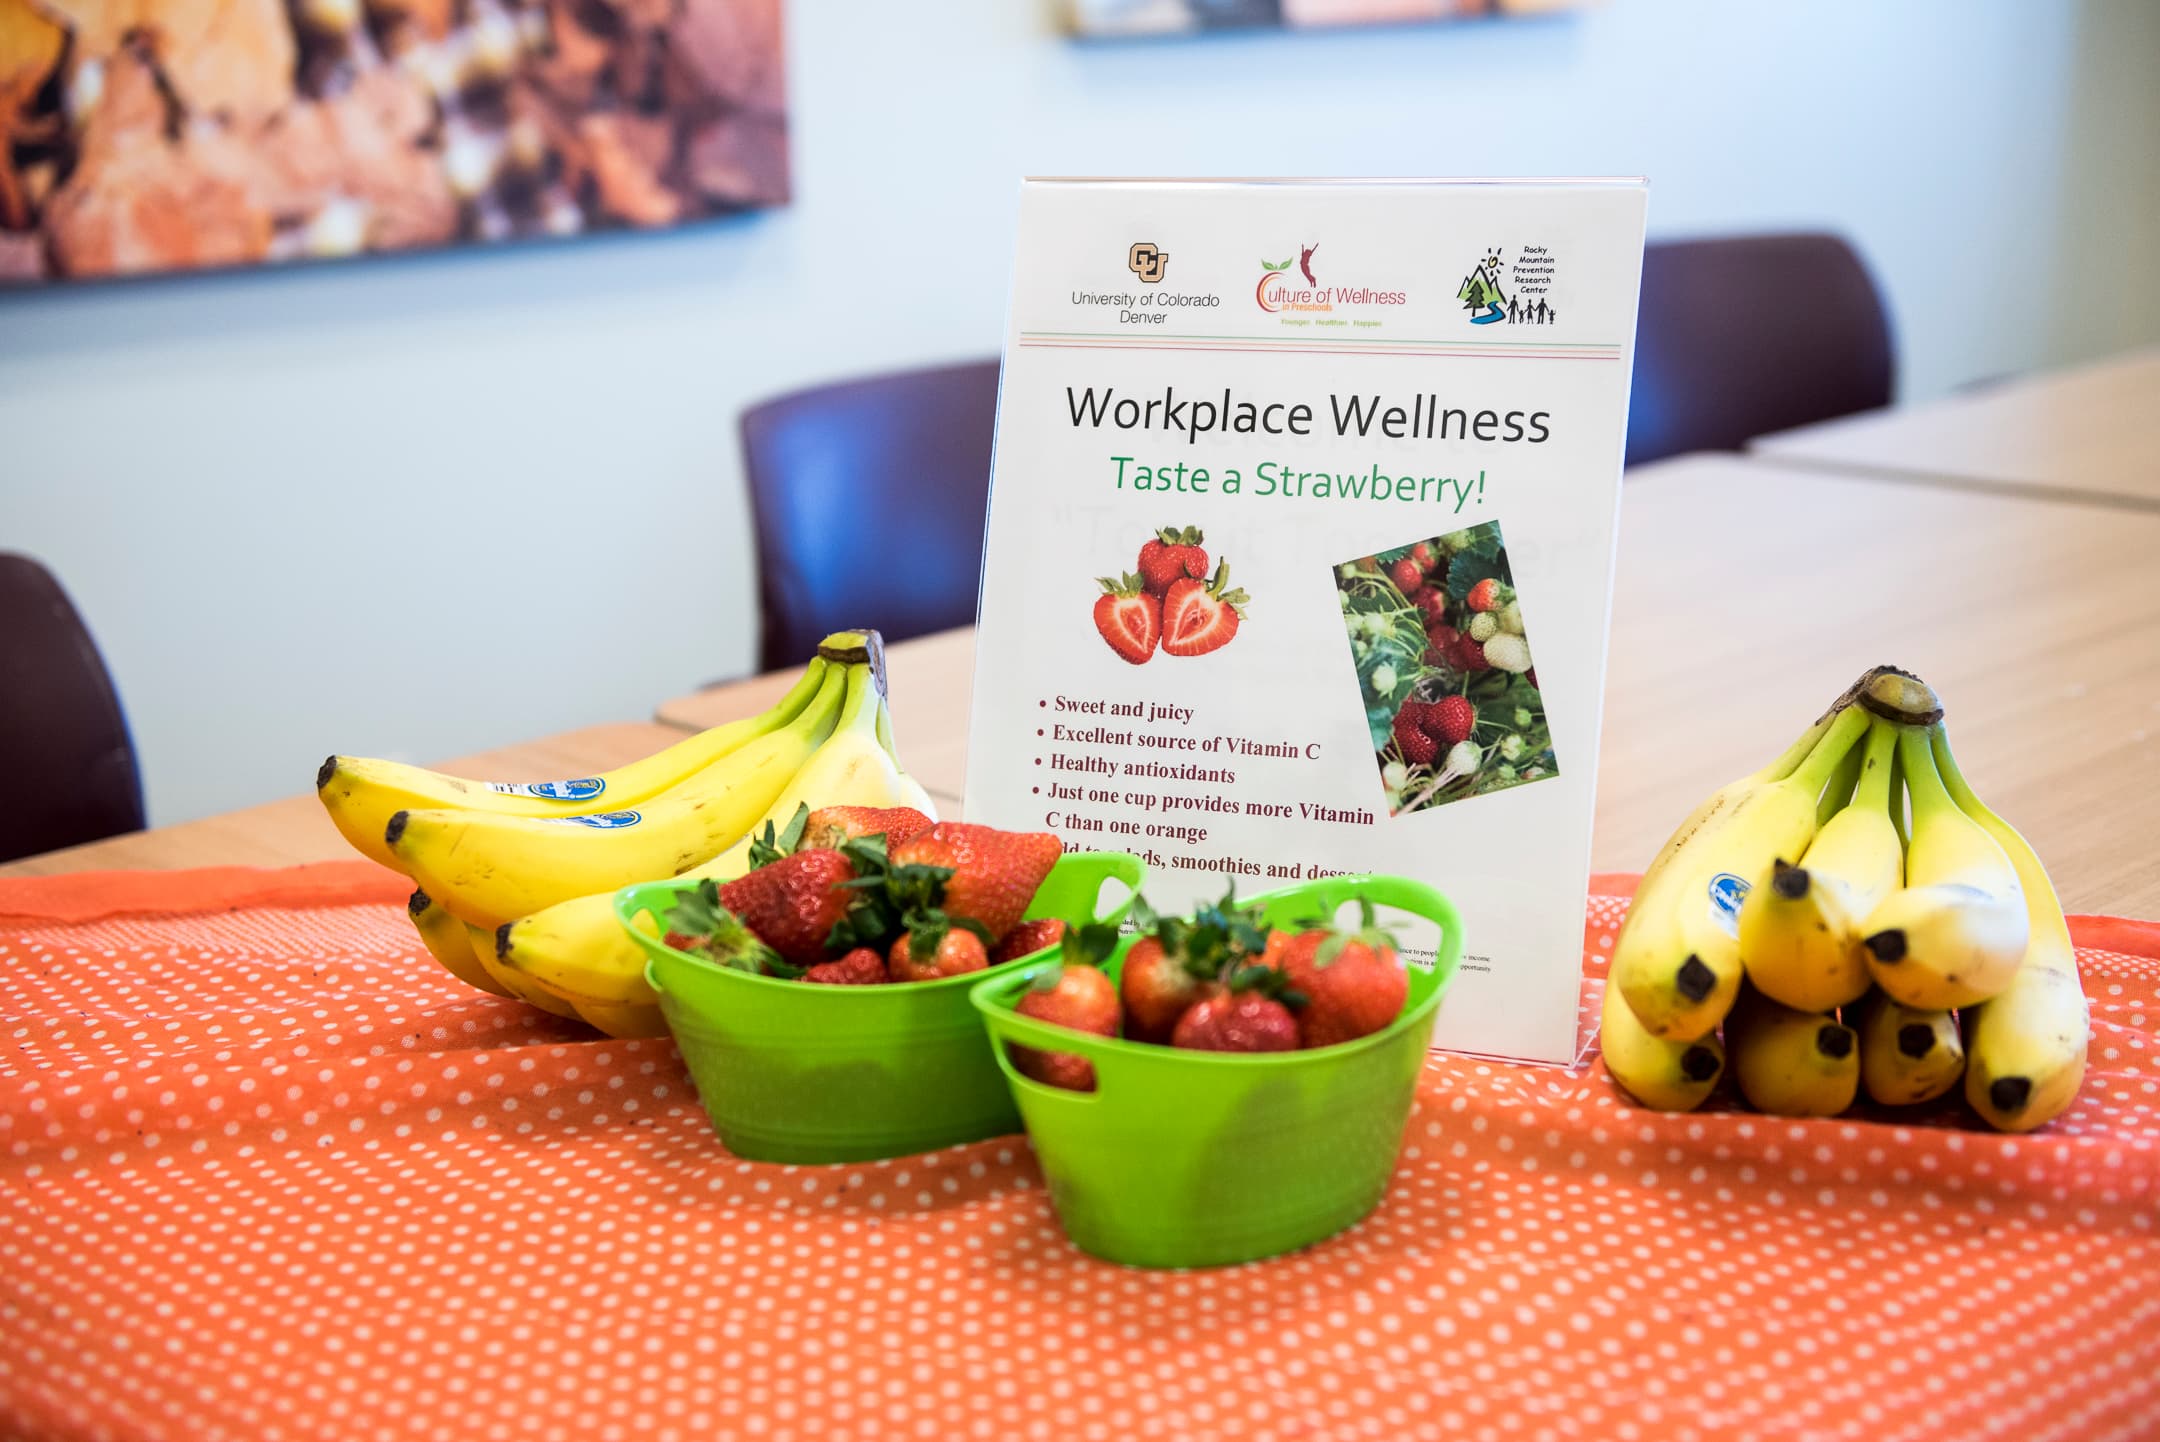 Bananas and strawberries on a table